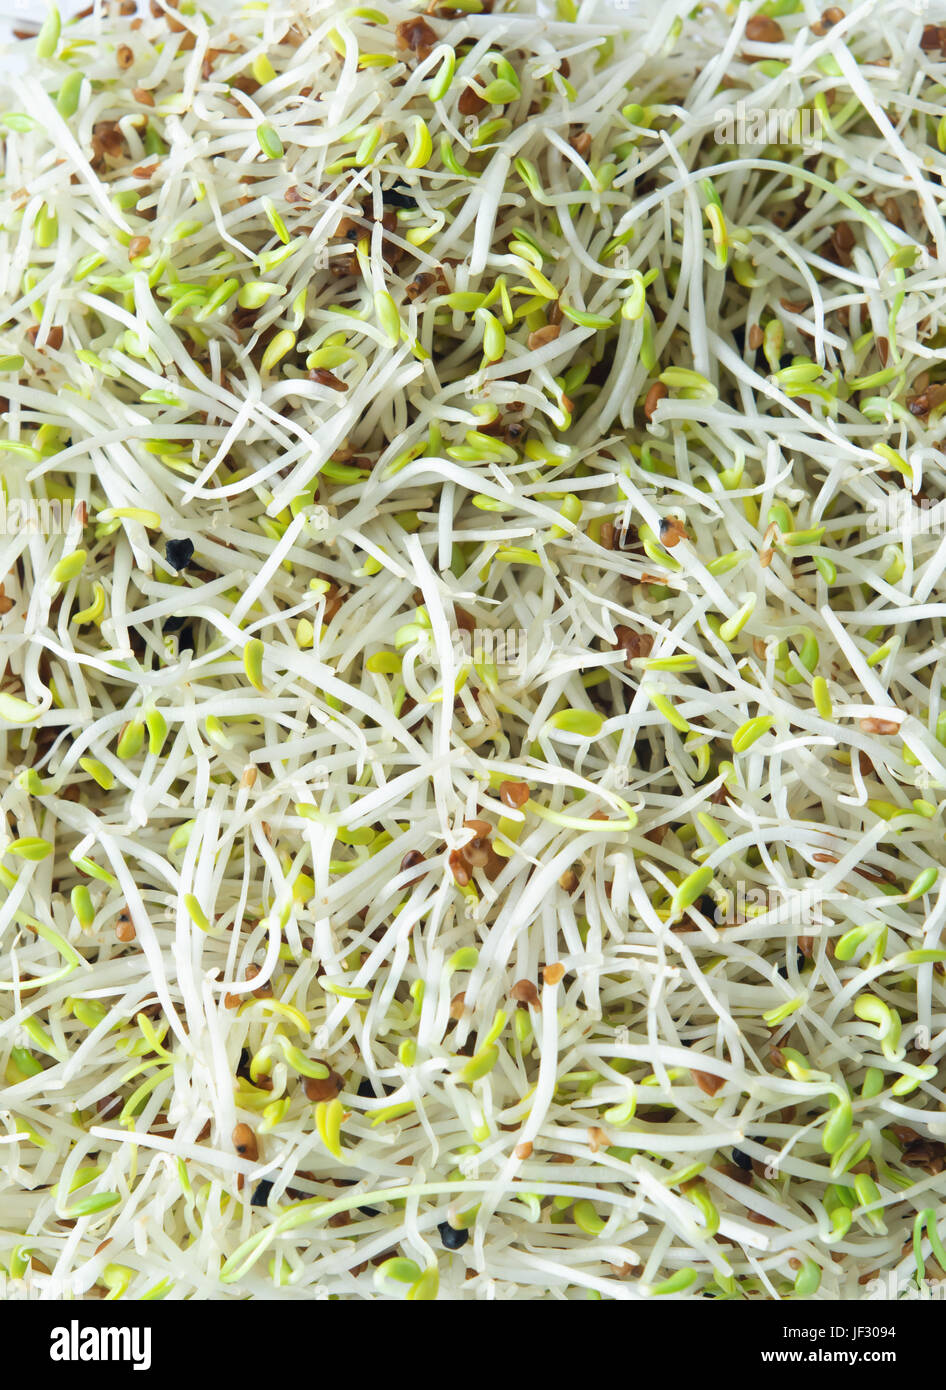 A mixture of alfalfa and leek beansprouts, filling whole frame. Stock Photo